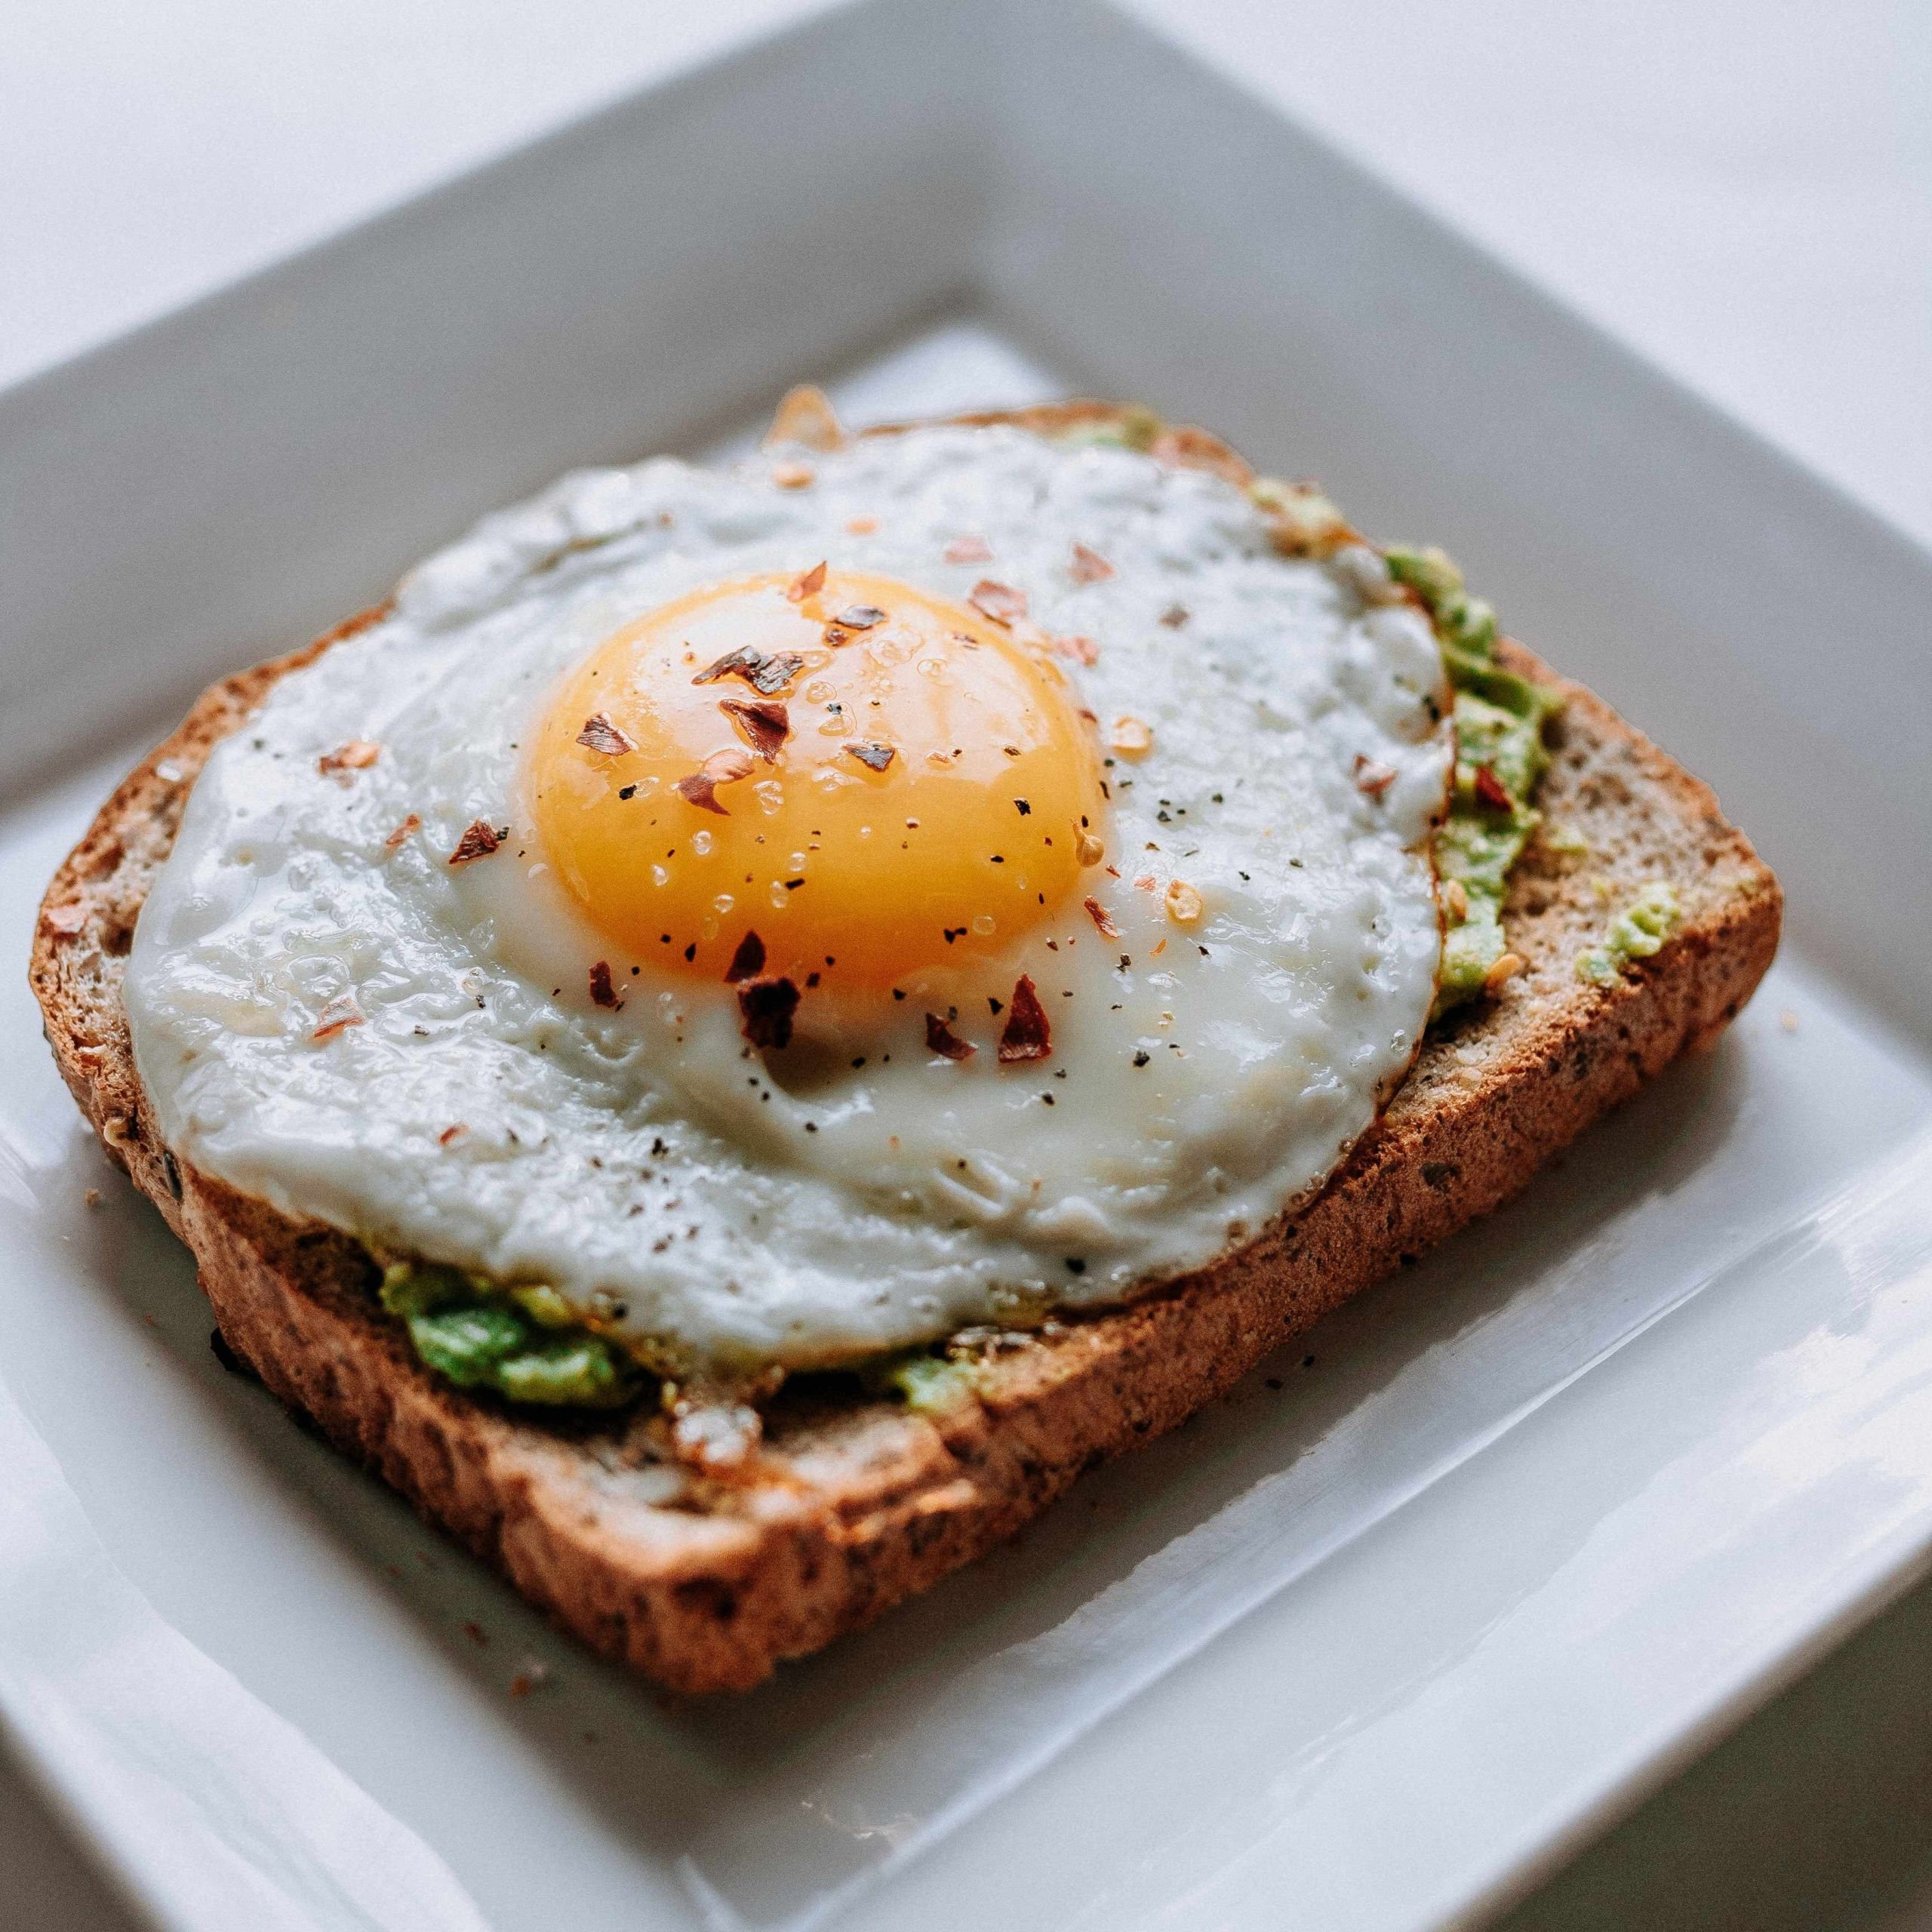 Avocado toast with a fried egg on top